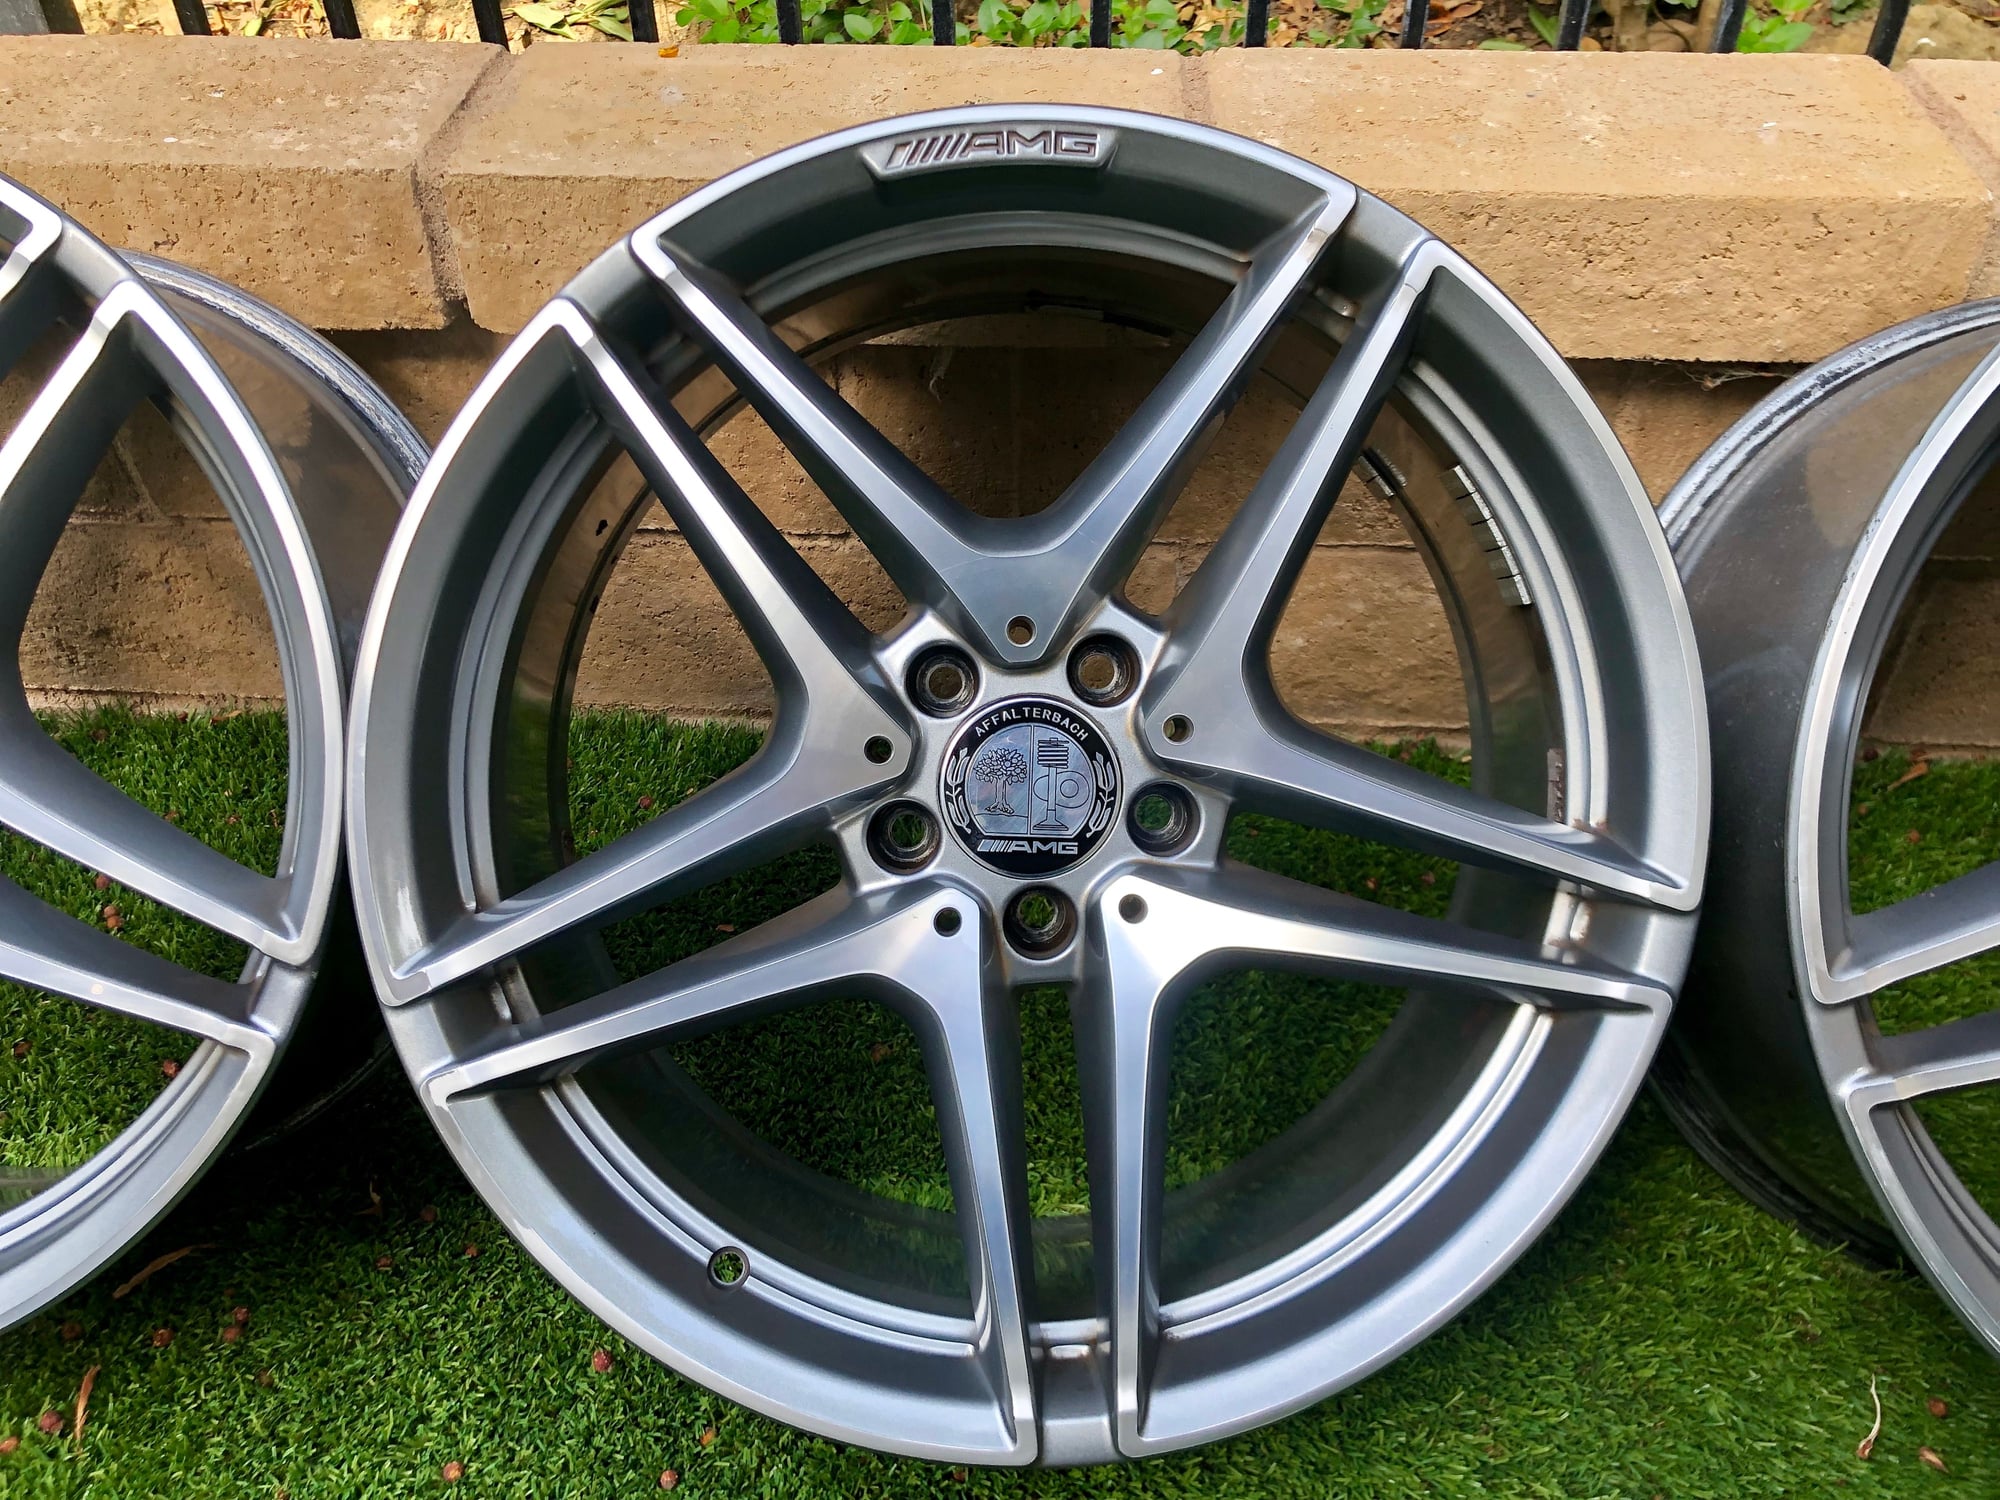 Wheels and Tires/Axles - 19" Mercedes-Benz AMG C63 Wheel *OEM* - Used - 2015 to 2019 Mercedes-Benz C63 AMG S - Irvine, CA 92603, United States